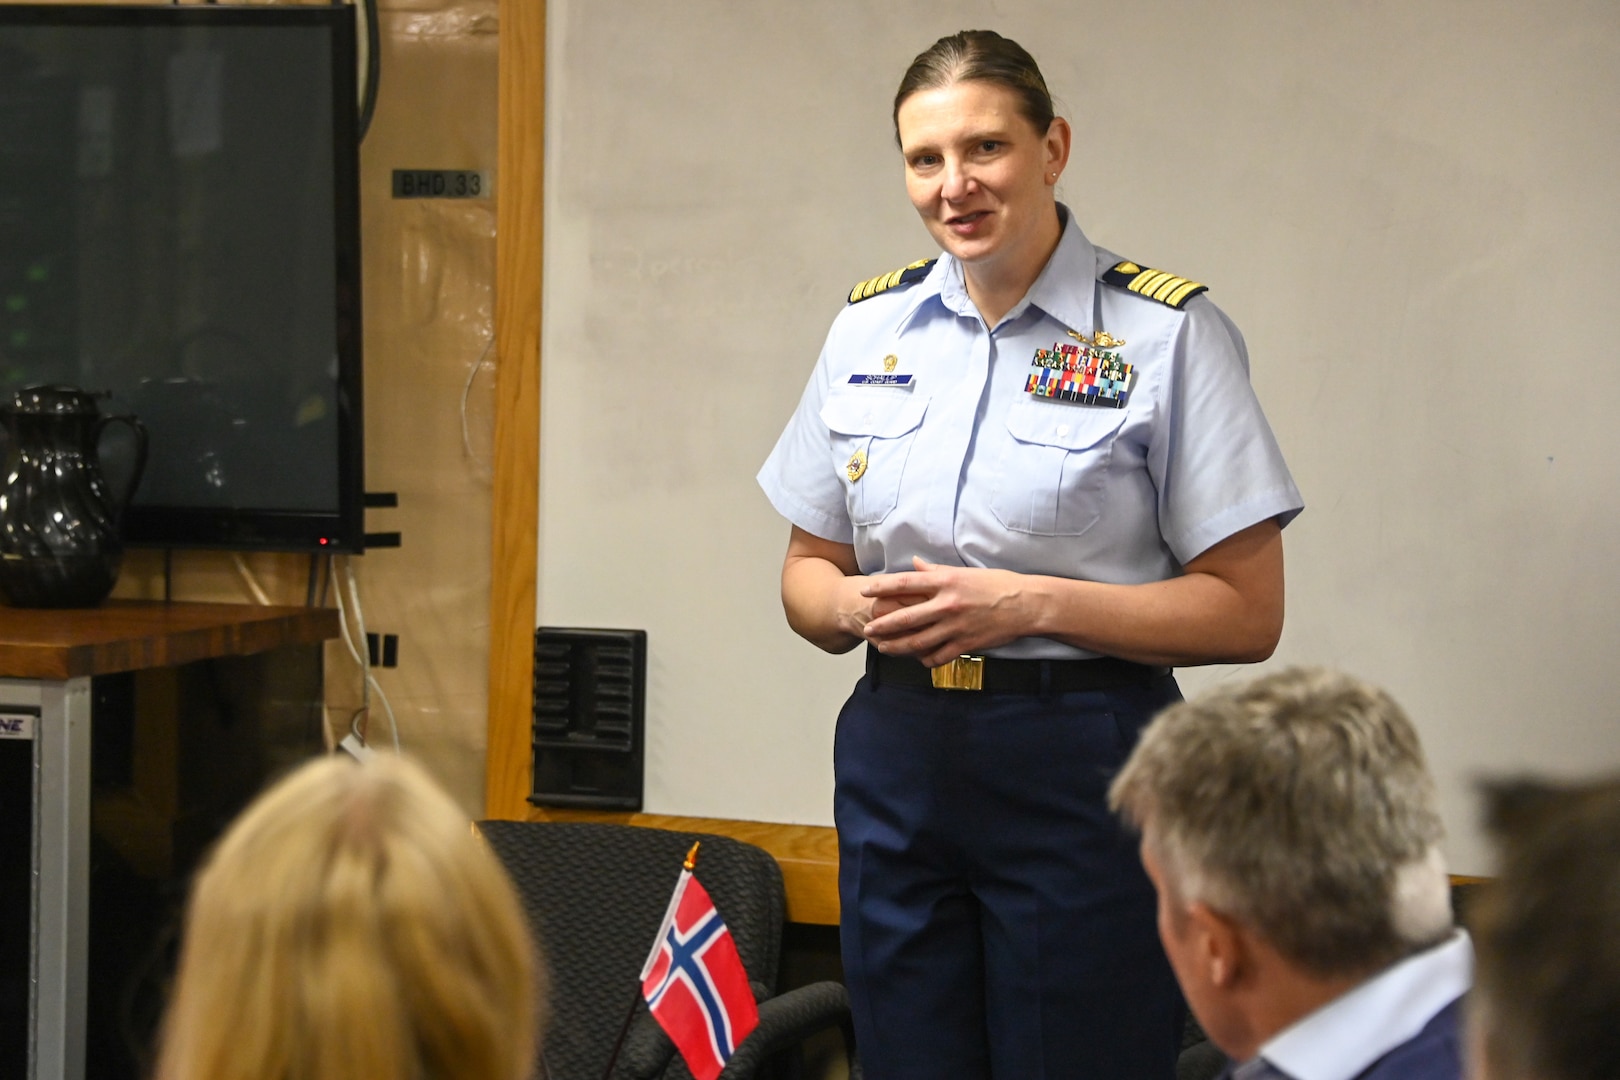 U.S. Coast Guard Capt. Michele Schallip, commanding officer of the U.S. Coast Guard Cutter Healy (WAGB 20) welcomes guests aboard the Healy for a scientific roundtable, in Tromsø, Norway, Oct. 3, 2023. The Healy conducted joint operations with the Norwegian Coast Guard Vessel Svalbard, hosted a U.S. Coast Guard Research and Development Center (RDC) “science roundtable,” and welcomed aboard guests from a variety of institutions with interest in the Arctic and Healy’s science mission. (U.S. Coast Guard photo by Senior Chief Petty Officer Charly Tautfest)